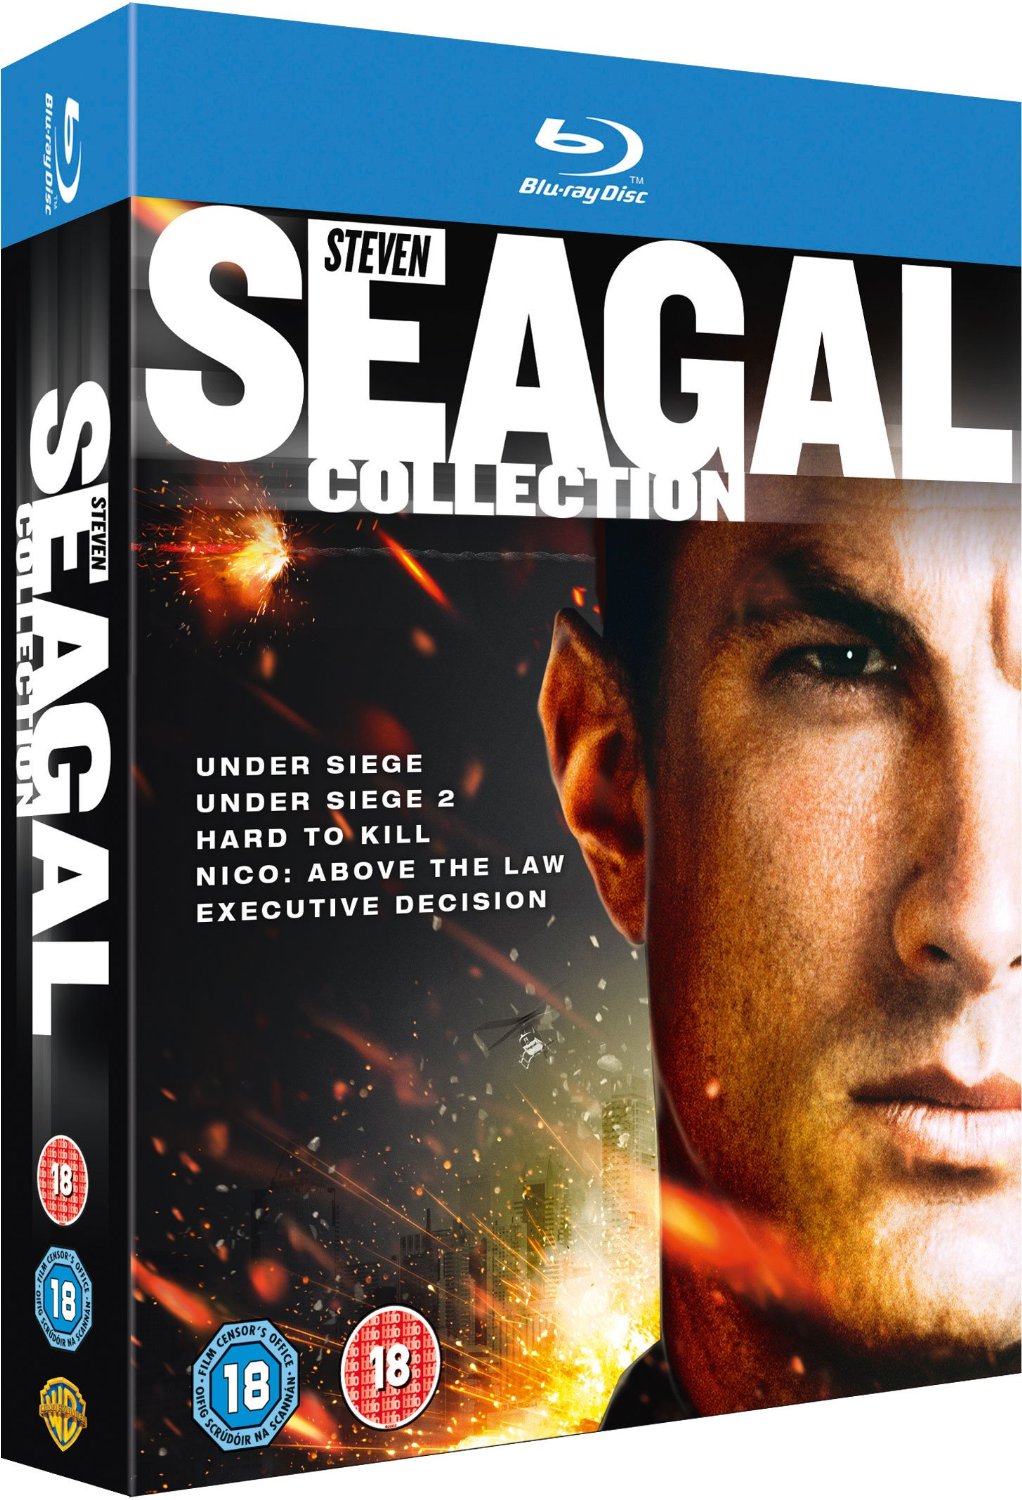 The Steven Seagal Collection [Blu-ray] [2012] [Region Free]